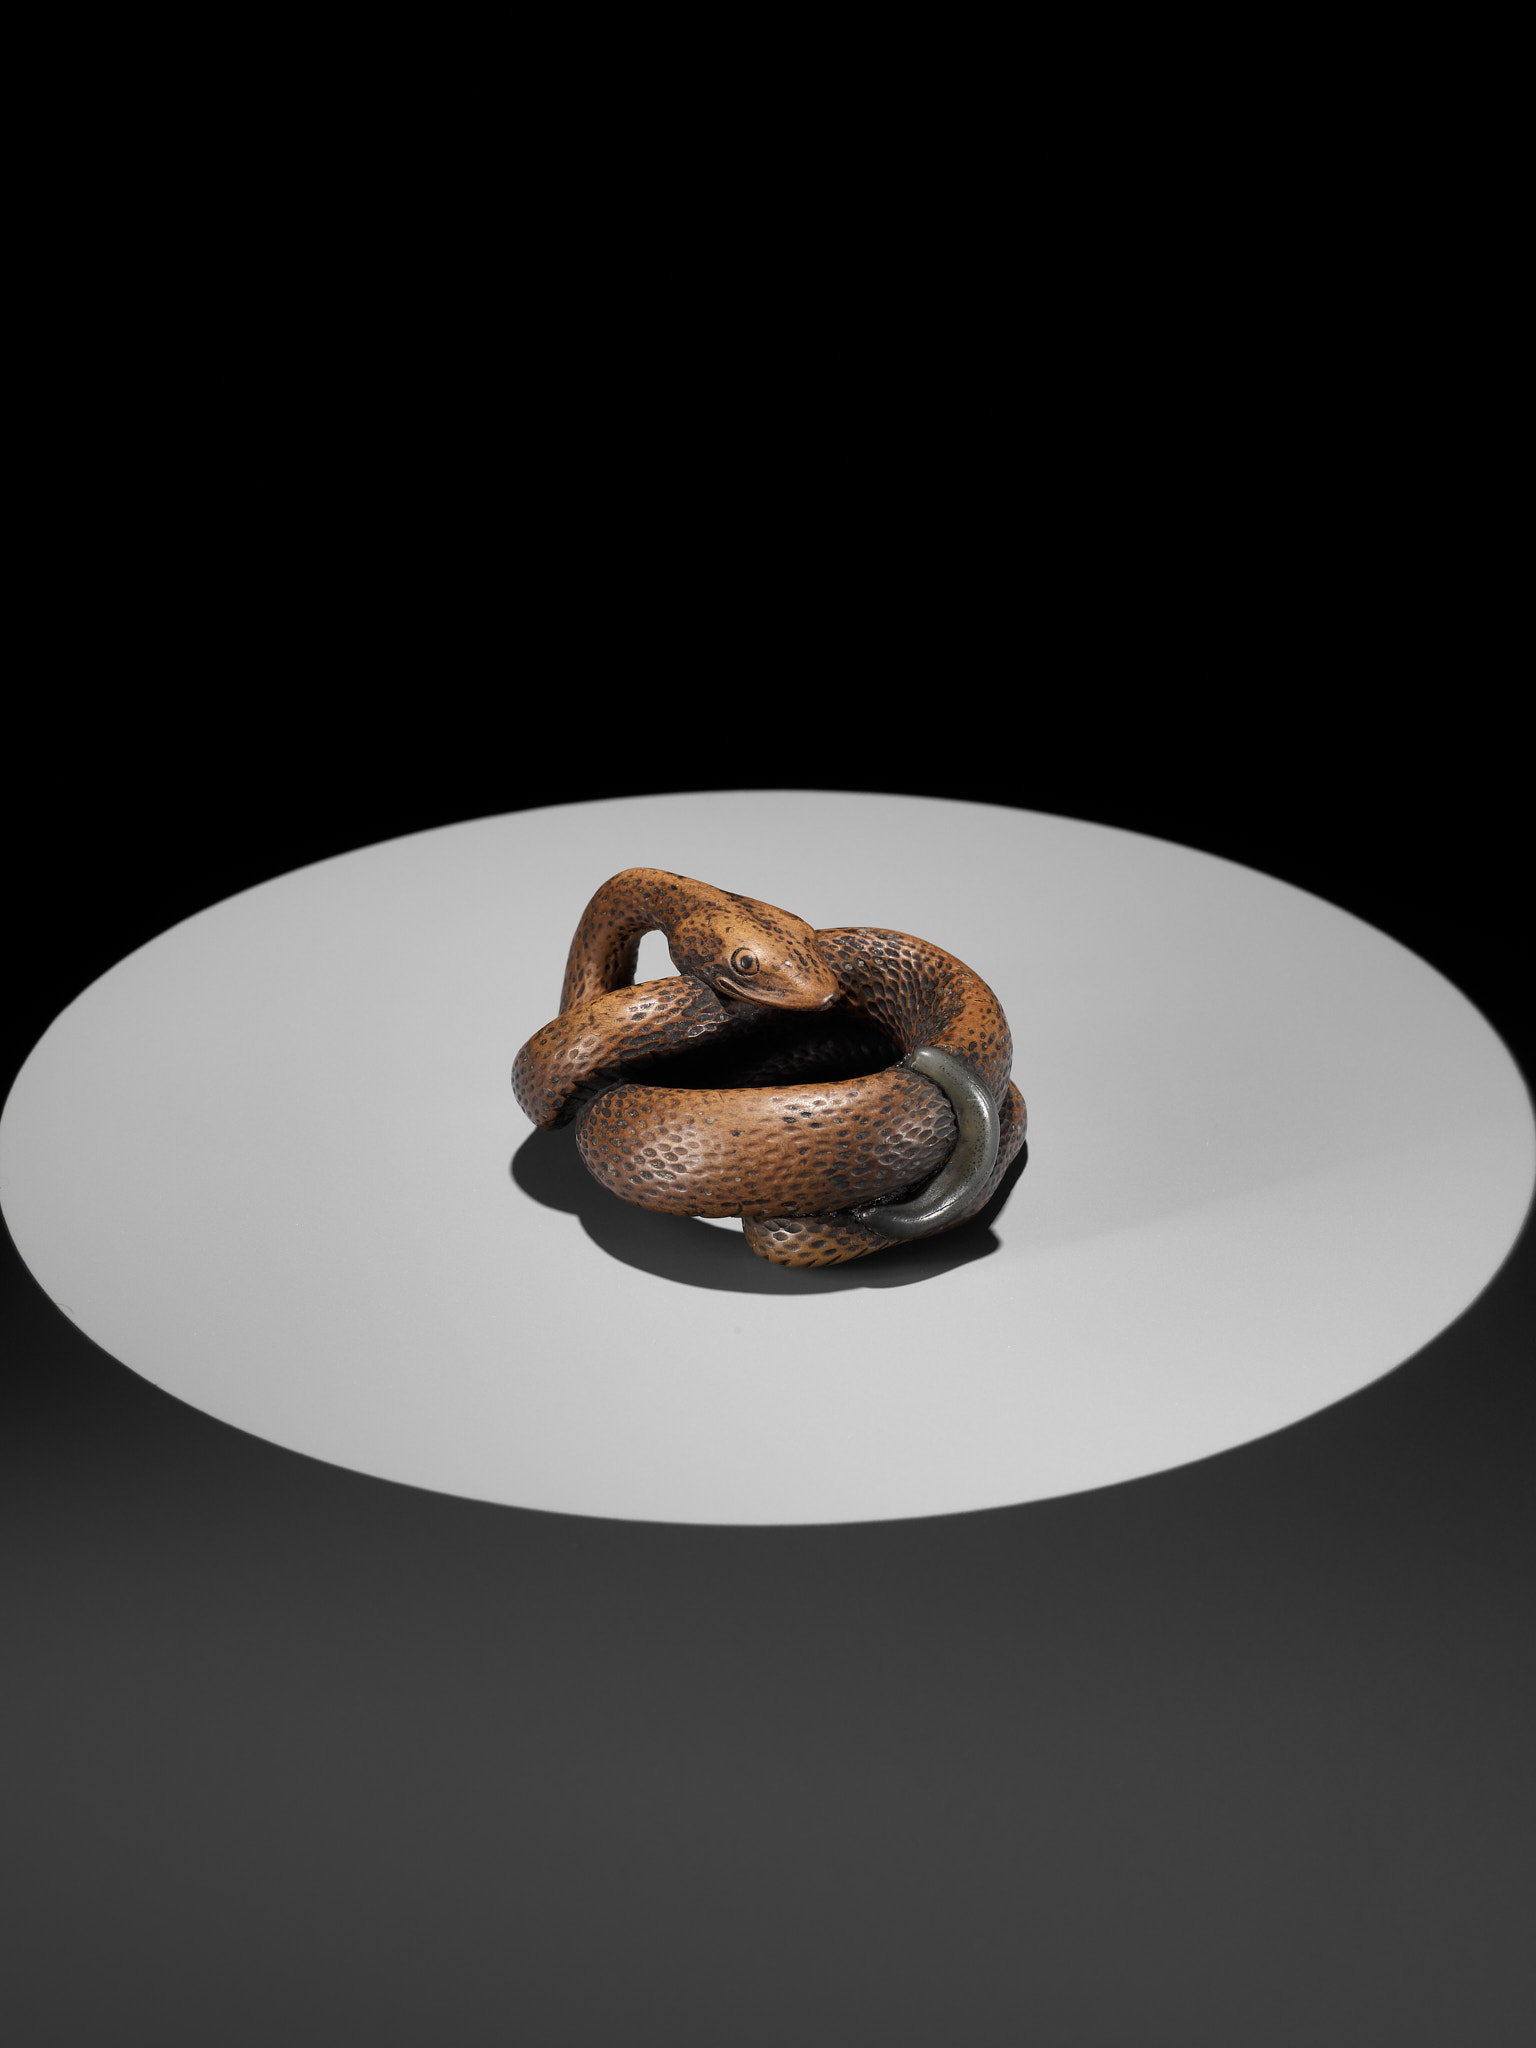 A LARGE AND POWERFUL WOOD NETSUKE OF A COILED SNAKE WITH AN INLAID SLUG BY TOMOKAZU - Image 9 of 13